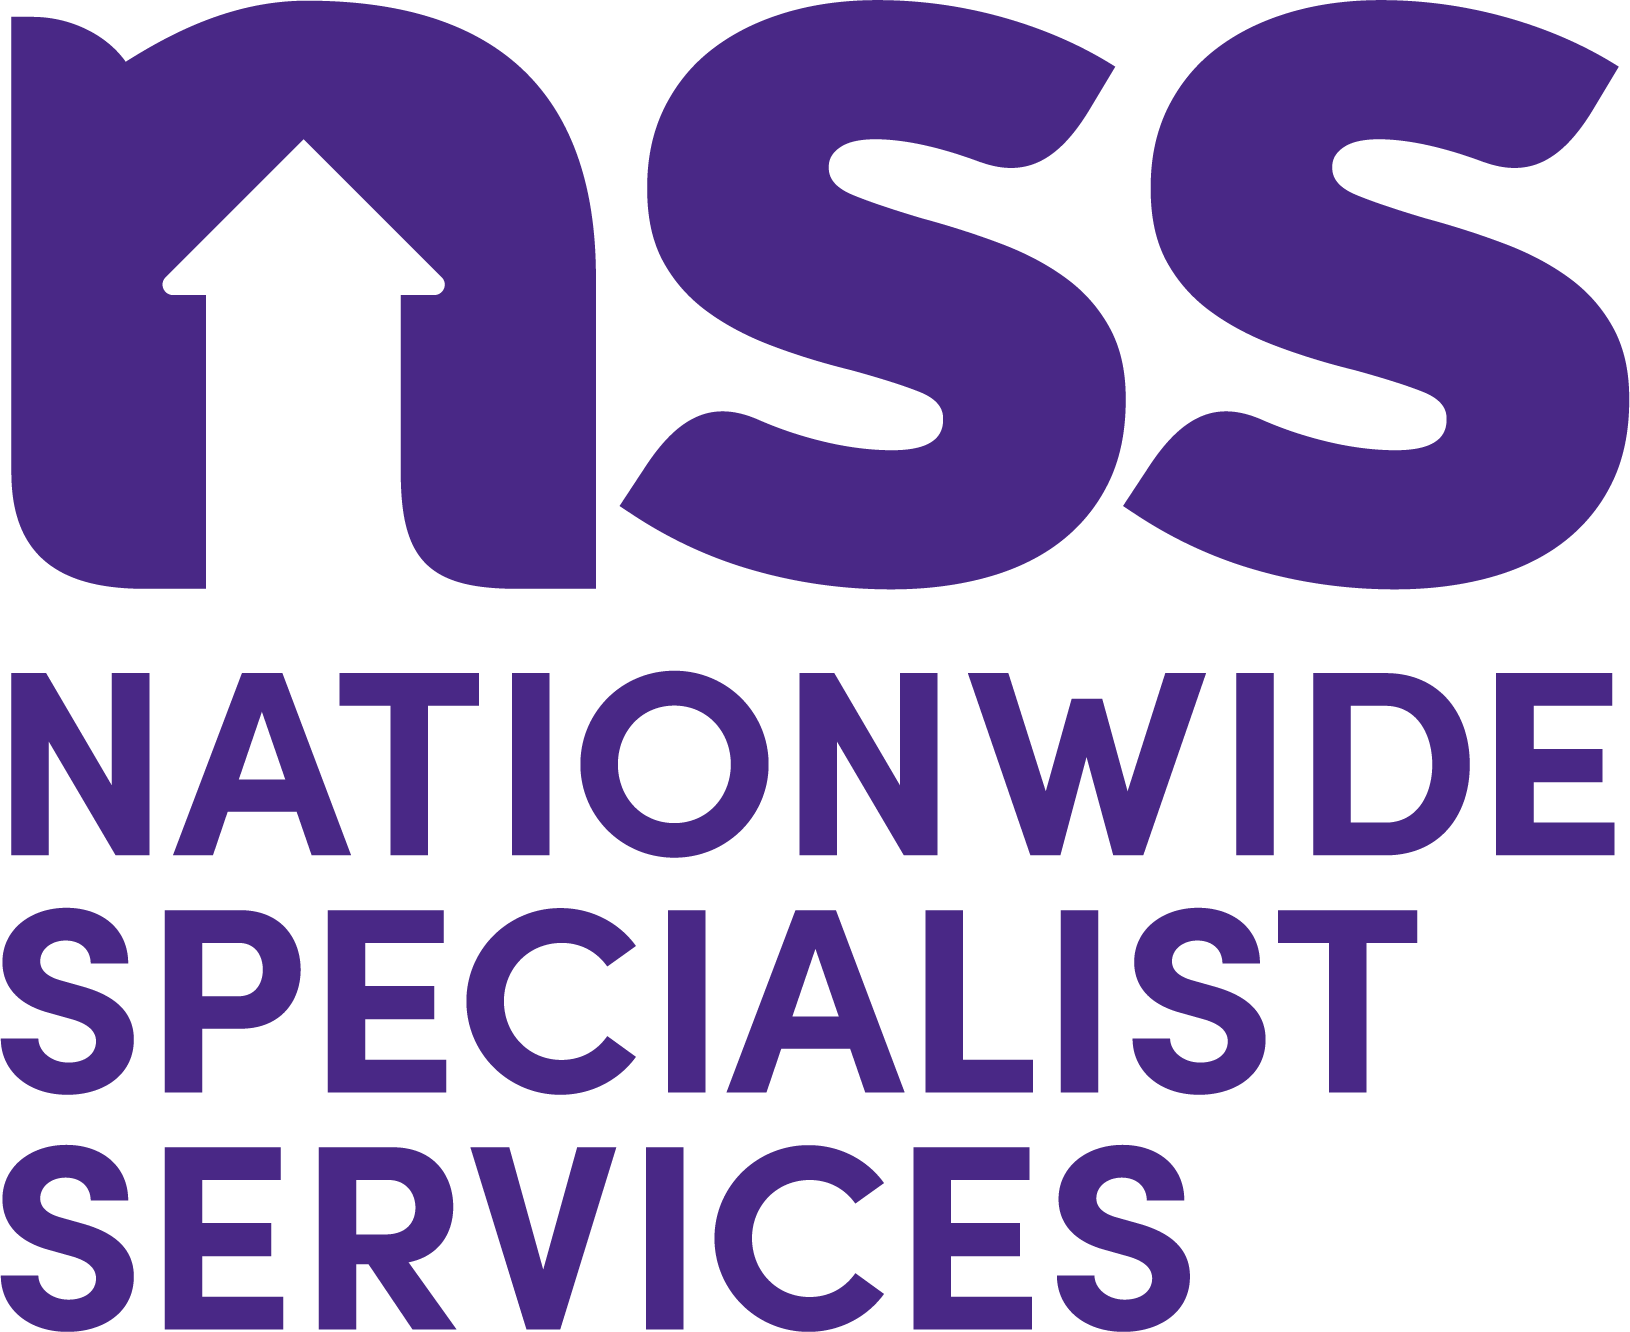 Nationwide Specialist Services